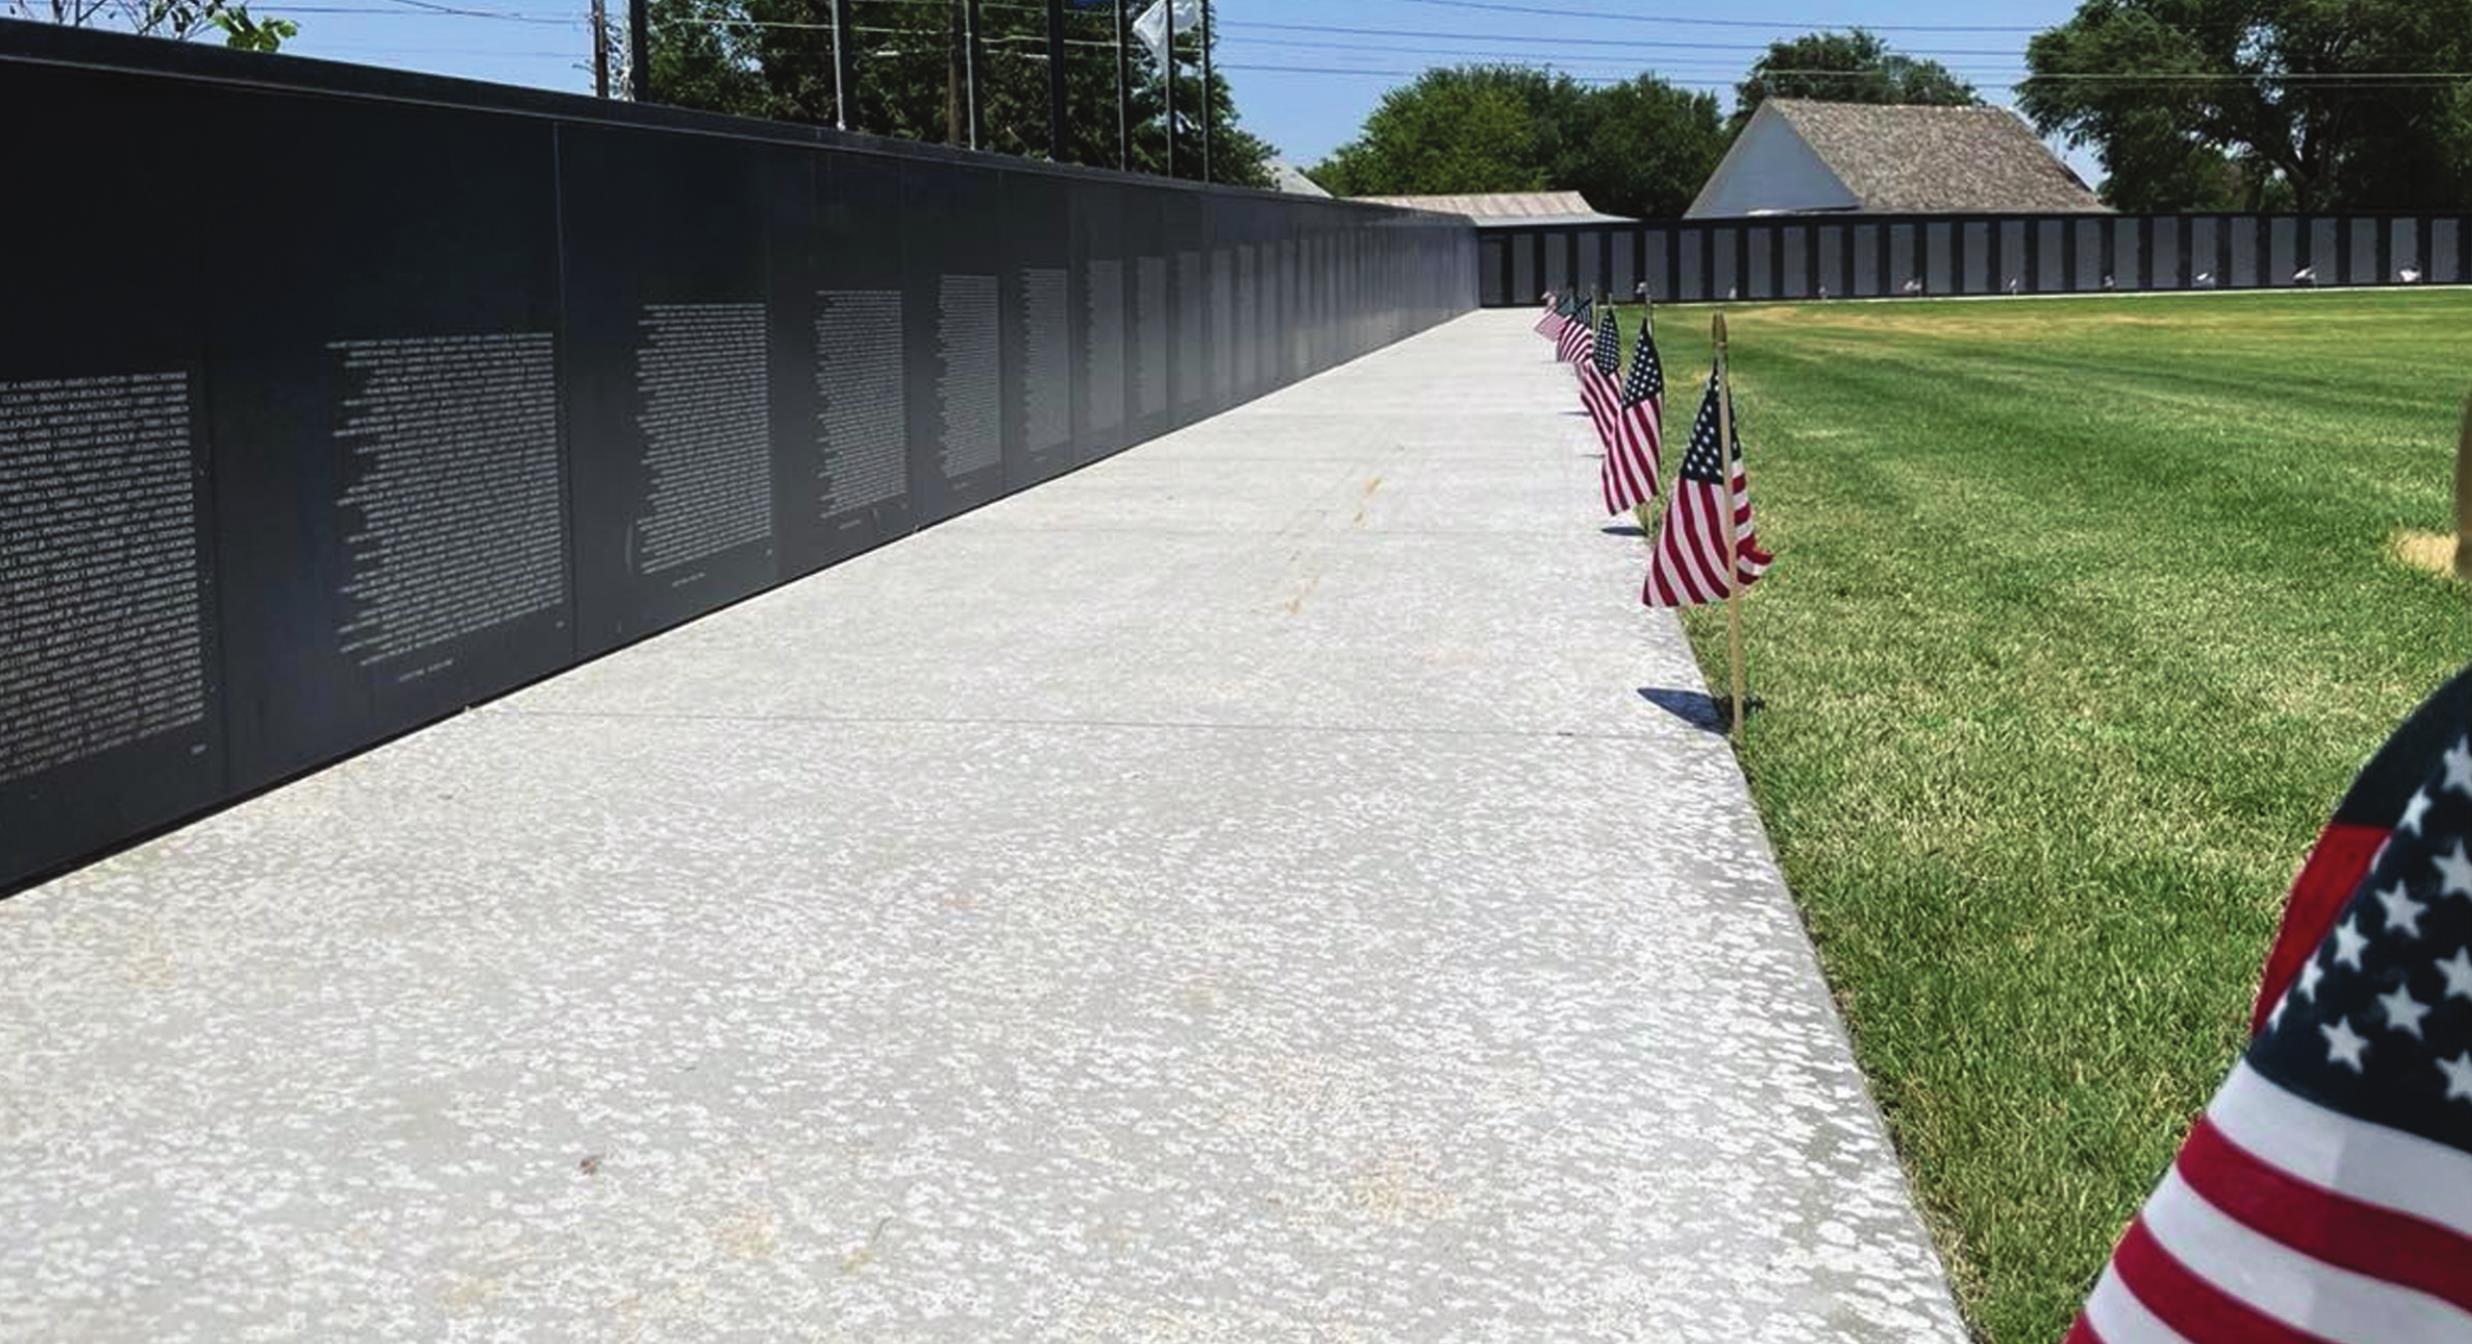 The newly built Vietnam Veterans Memorial replica wall stands in Weatherford’s Heritage Park. A group of Vietnam veterans joined community members in attending the dedication of the wall Saturday morning. Montgomery Malone/WDN